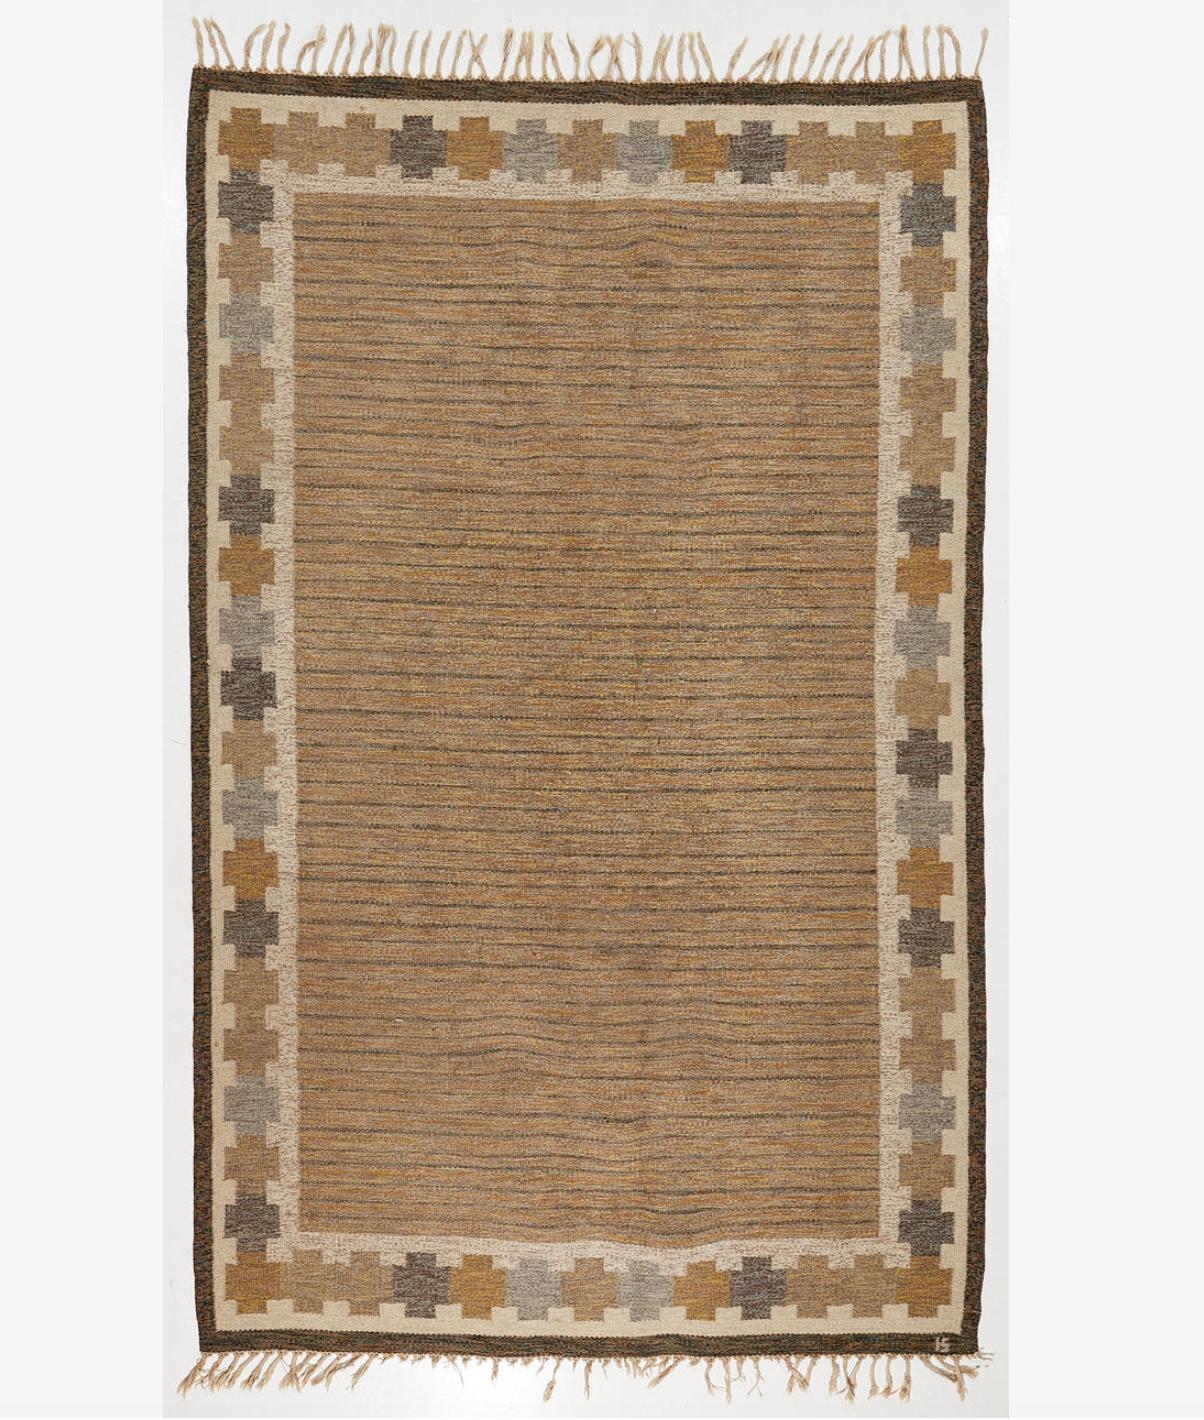 Flat wave rug designed by Ingegerd Silow . Circa 1950th.
Signed IS.  Sweden.   Hand woven wool. Dimensions:     L 117″. W 74″ .